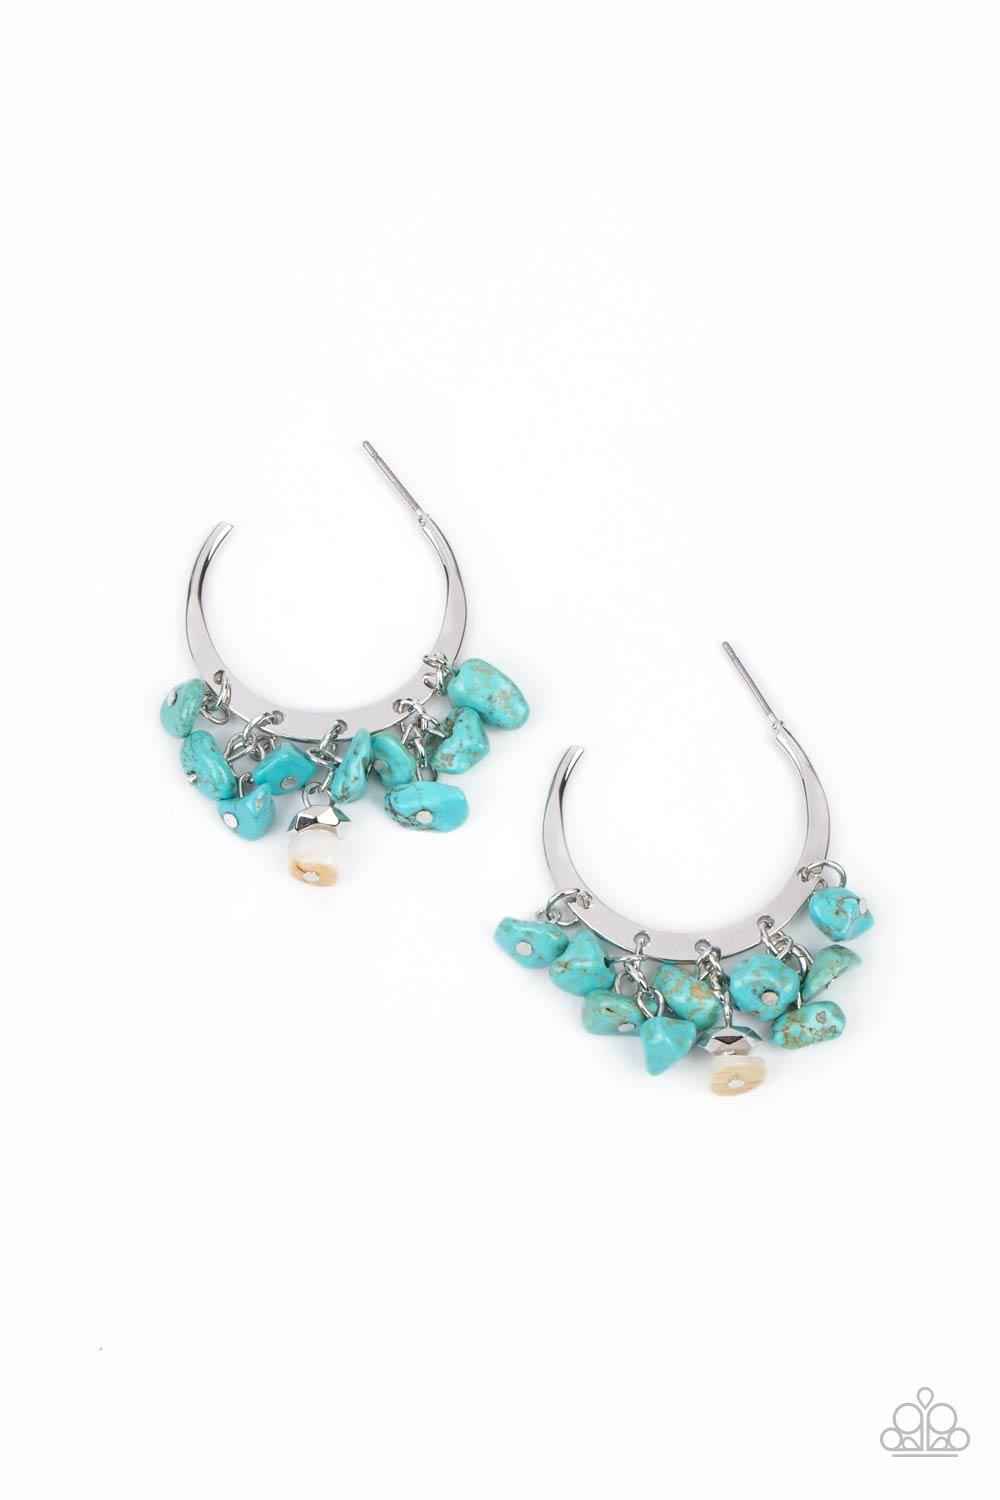 Paparazzi Accessories Gorgeously Grounding - Blue Clusters of turquoise pebbles swing from the bottom of a dainty silver hoop, creating an earthy fringe. A faceted silver and white stone bead swings from the center, adding an ethereal edge. Earring attach